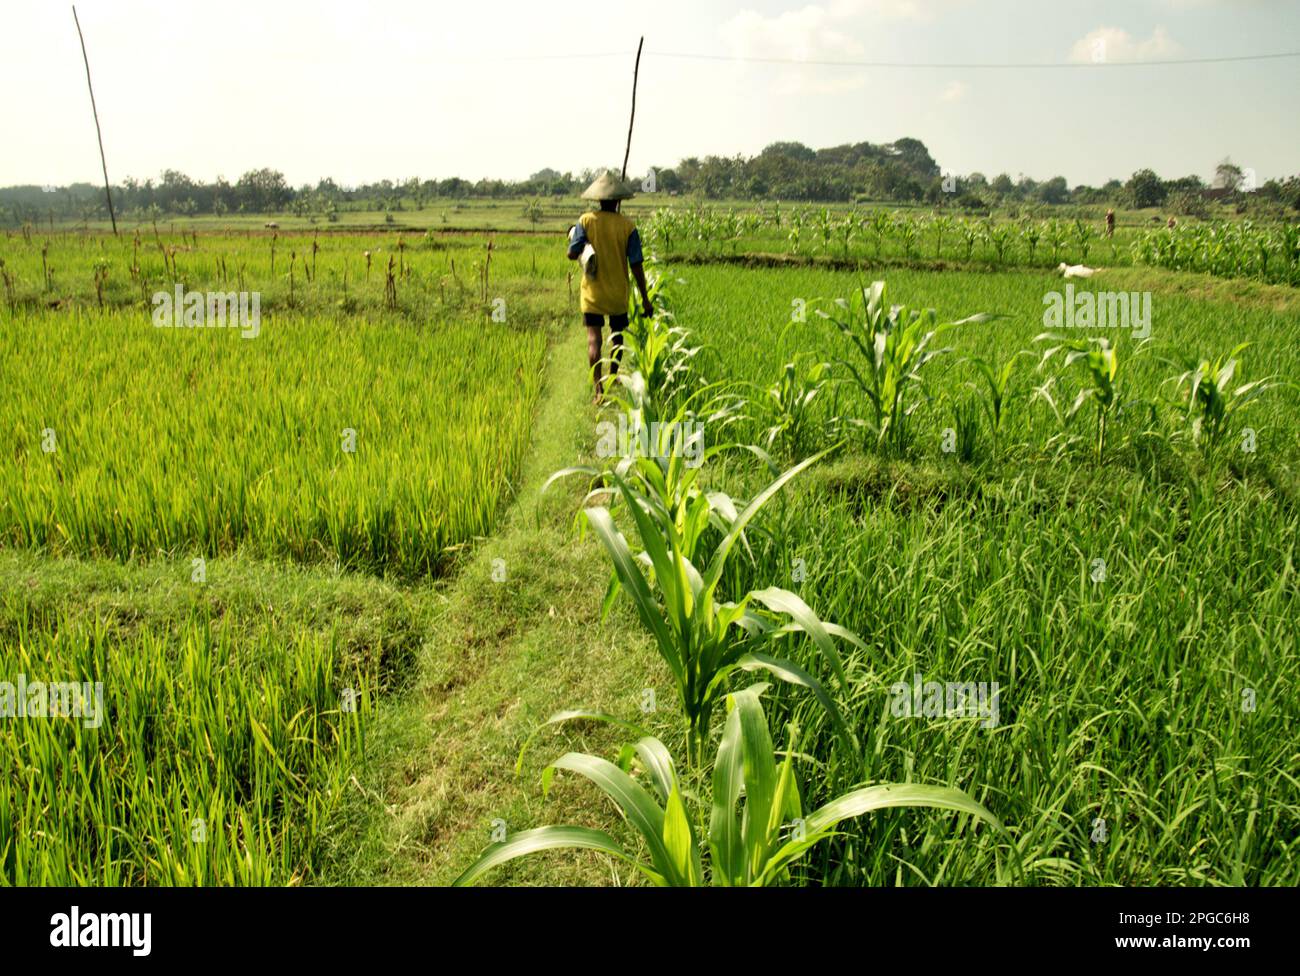 A farmer walks on a dike through rice terraces as he is in daily duty of collecting grass to feed livestock in Kradenan, Blora, Central Java, Indonesia. Climate change will increasingly expose outdoor workers to heat stress and reducing labour capacity, according to the 2023 report published by the Intergovernmental Panel on Climate Change (IPCC), entitled 'Climate Change 2022: Impacts, Adaptation and Vulnerability'. The report suggests that climate change adaptation options are needed to protect agricultural worker productivity outdoors and reduce occupational heat illnesses and deaths. Stock Photo